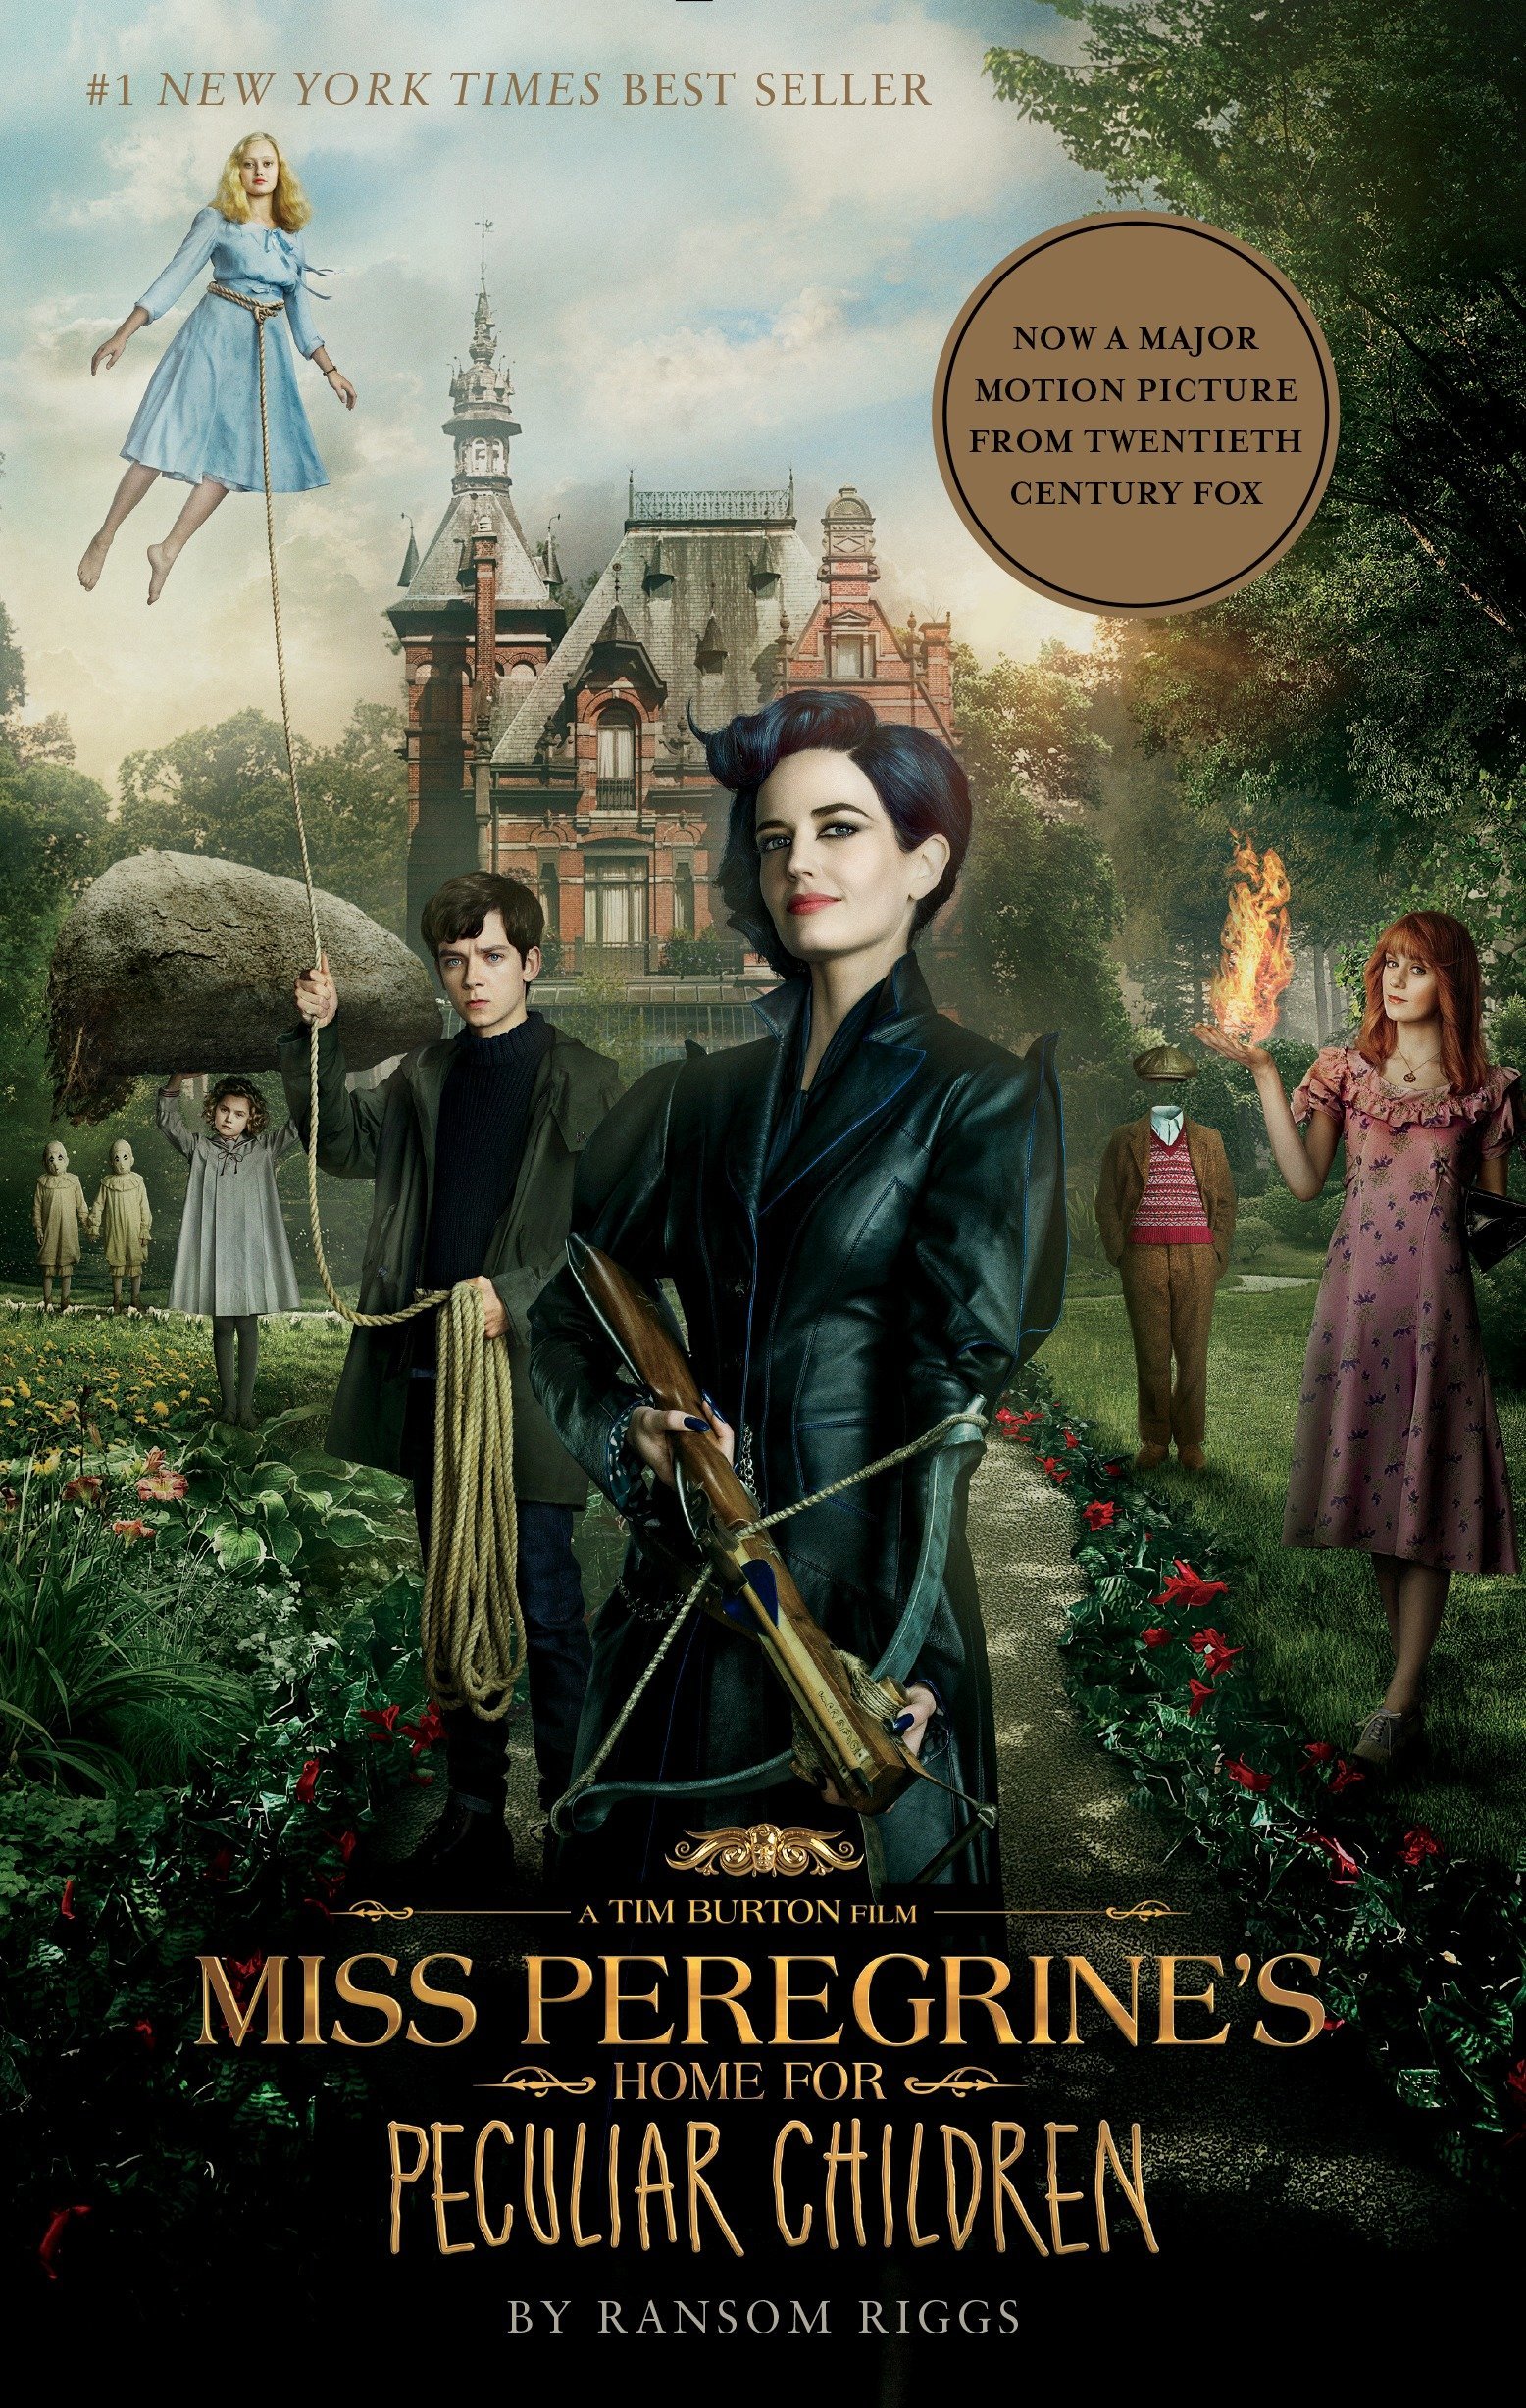 Miss Peregrine's Home for Peculiar Children (Movie Tie-In Edition): 1 (Miss Peregrine's Peculiar Children)